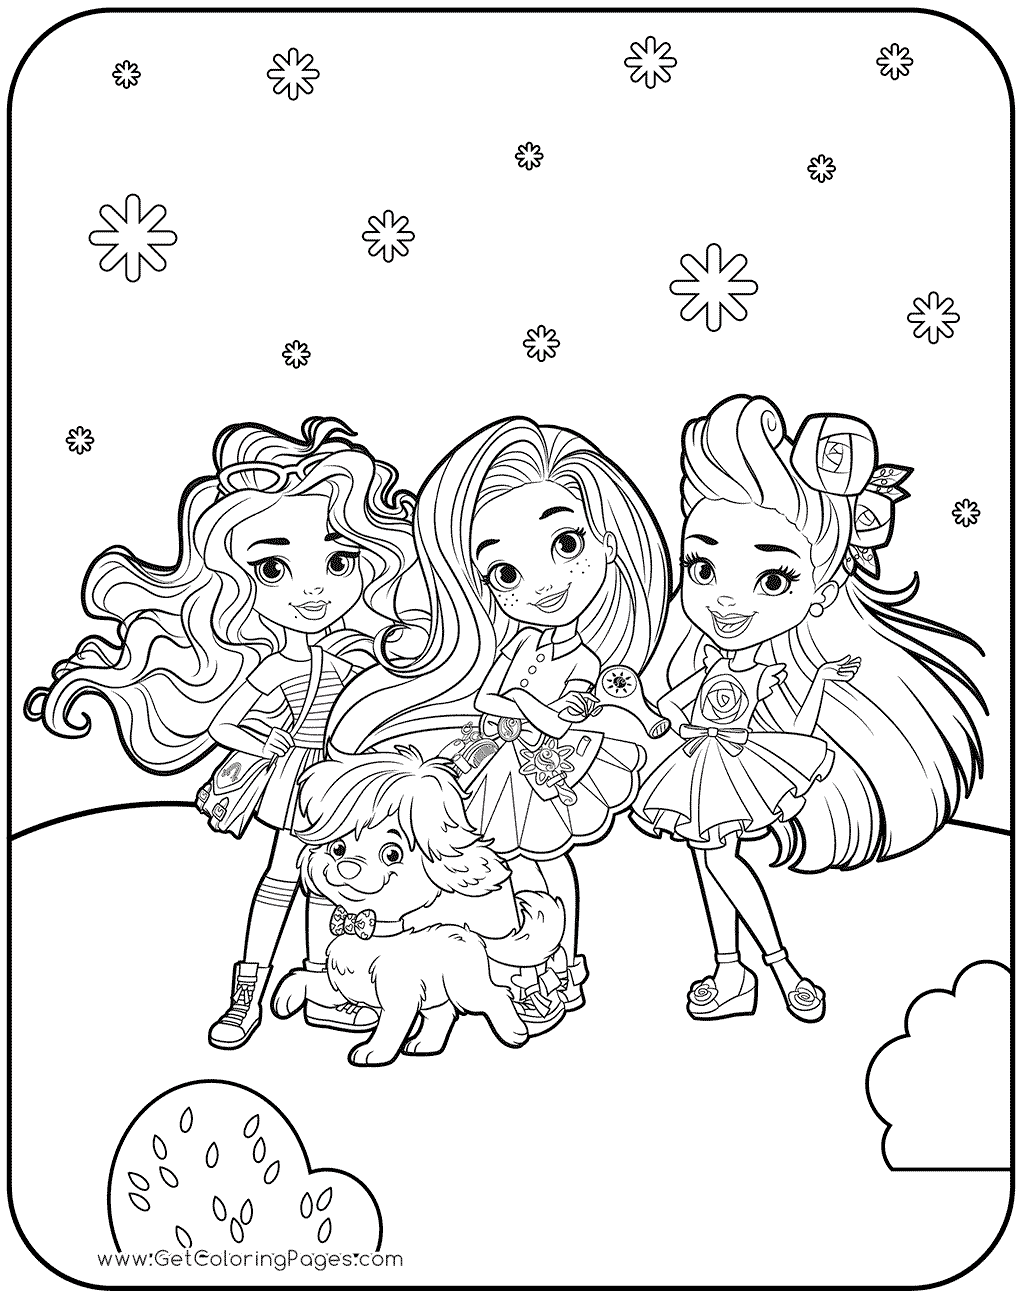 Coloring Pages Of Best Friends Forever at GetColorings.com | Free